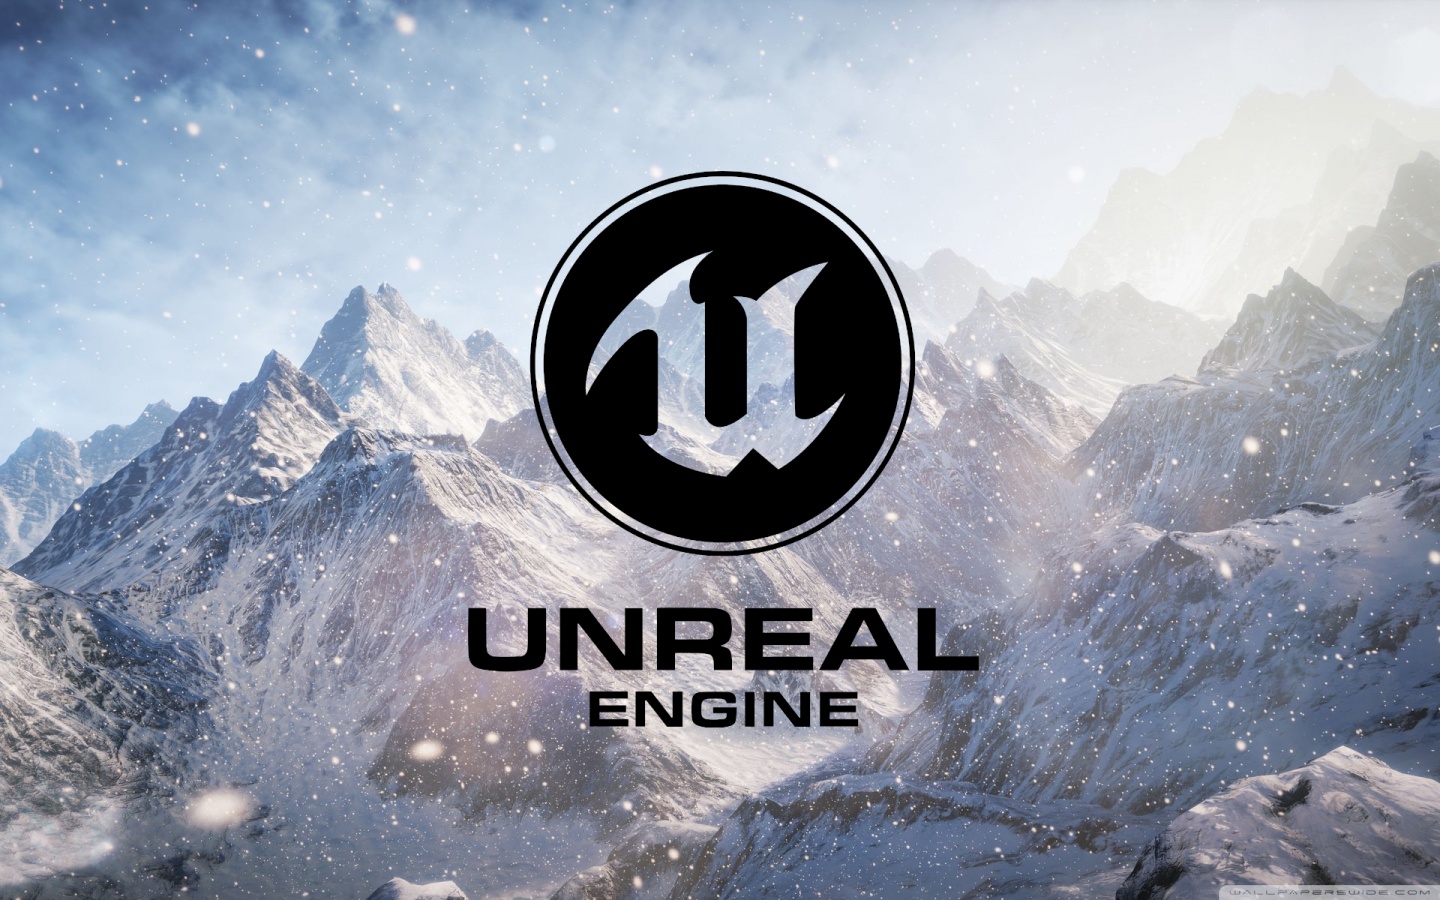 My encounter with Unreal Engine